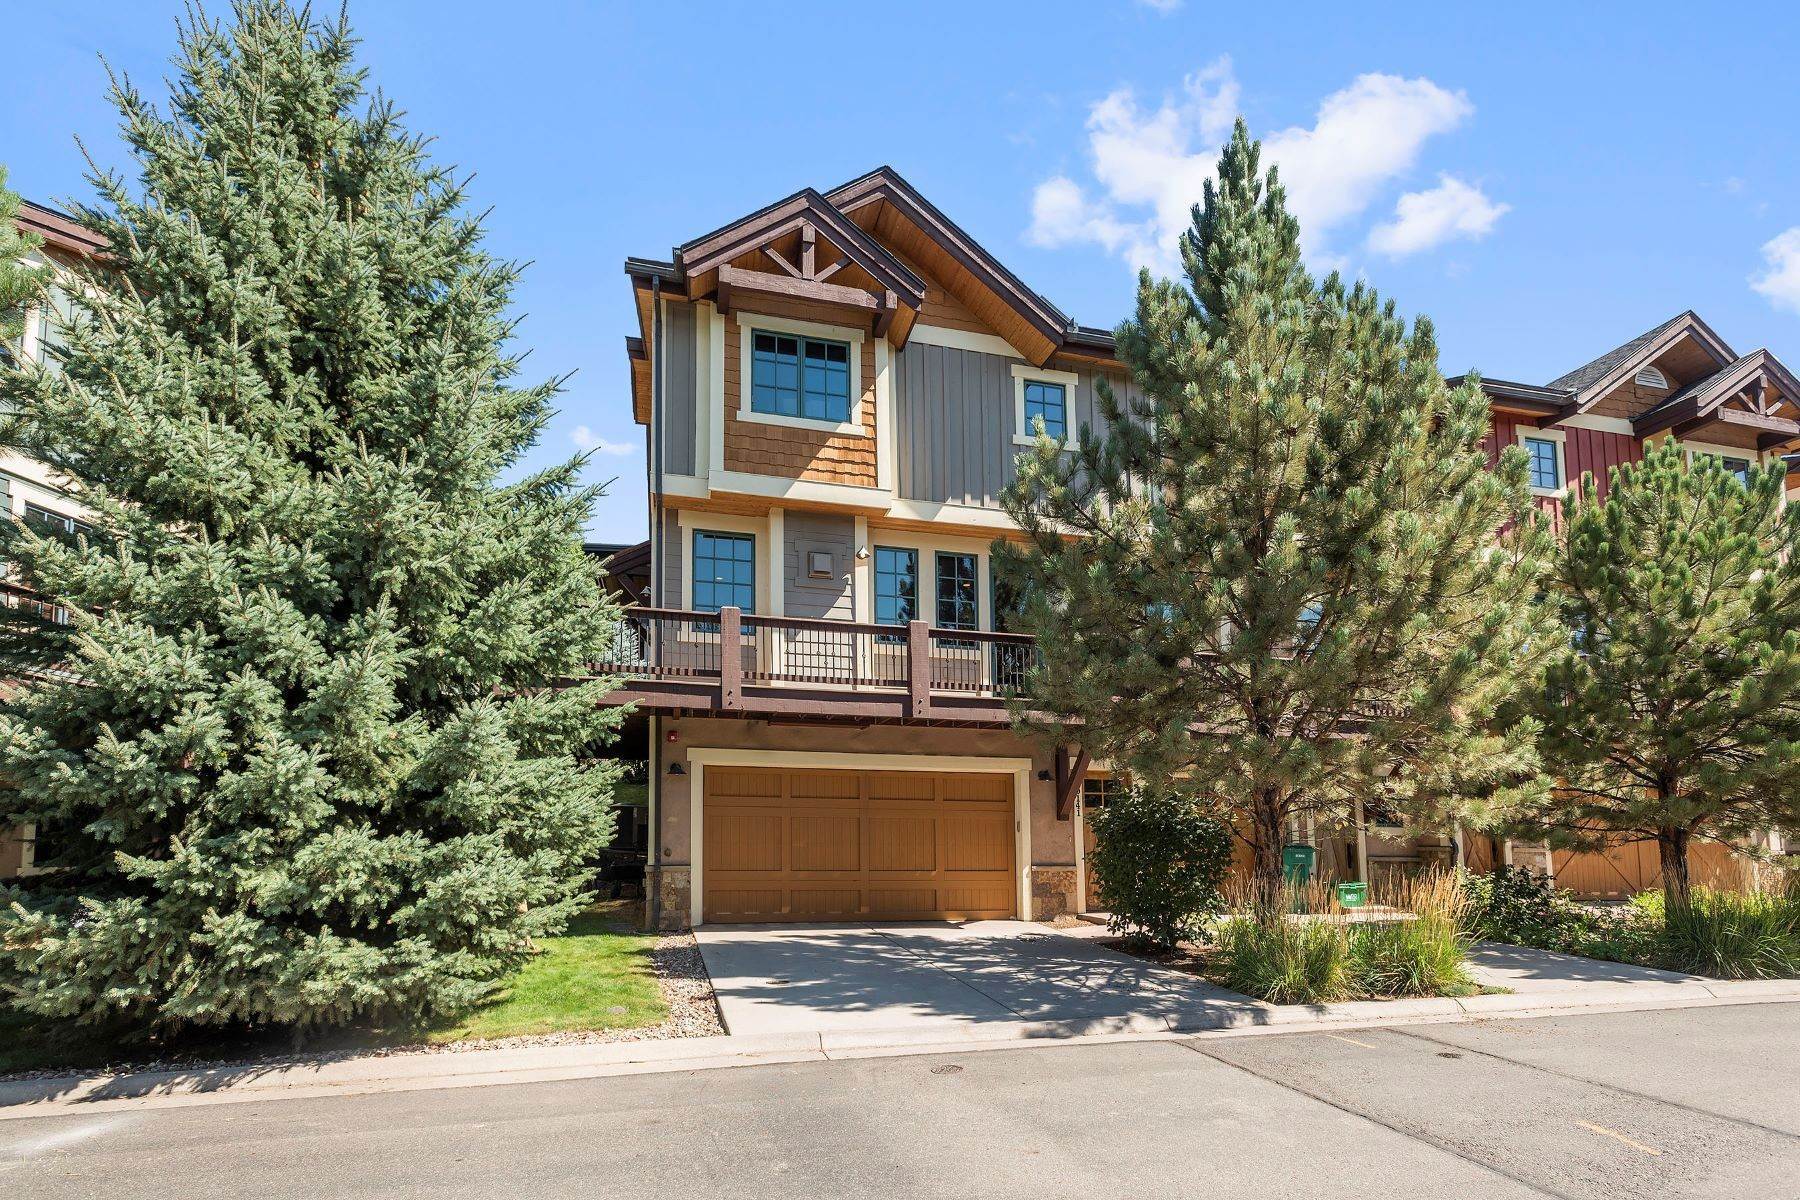 Single Family Homes for Active at Beautifully Maintained Shadowrock Townhome 141 Juniper Trail Carbondale, Colorado 81623 United States